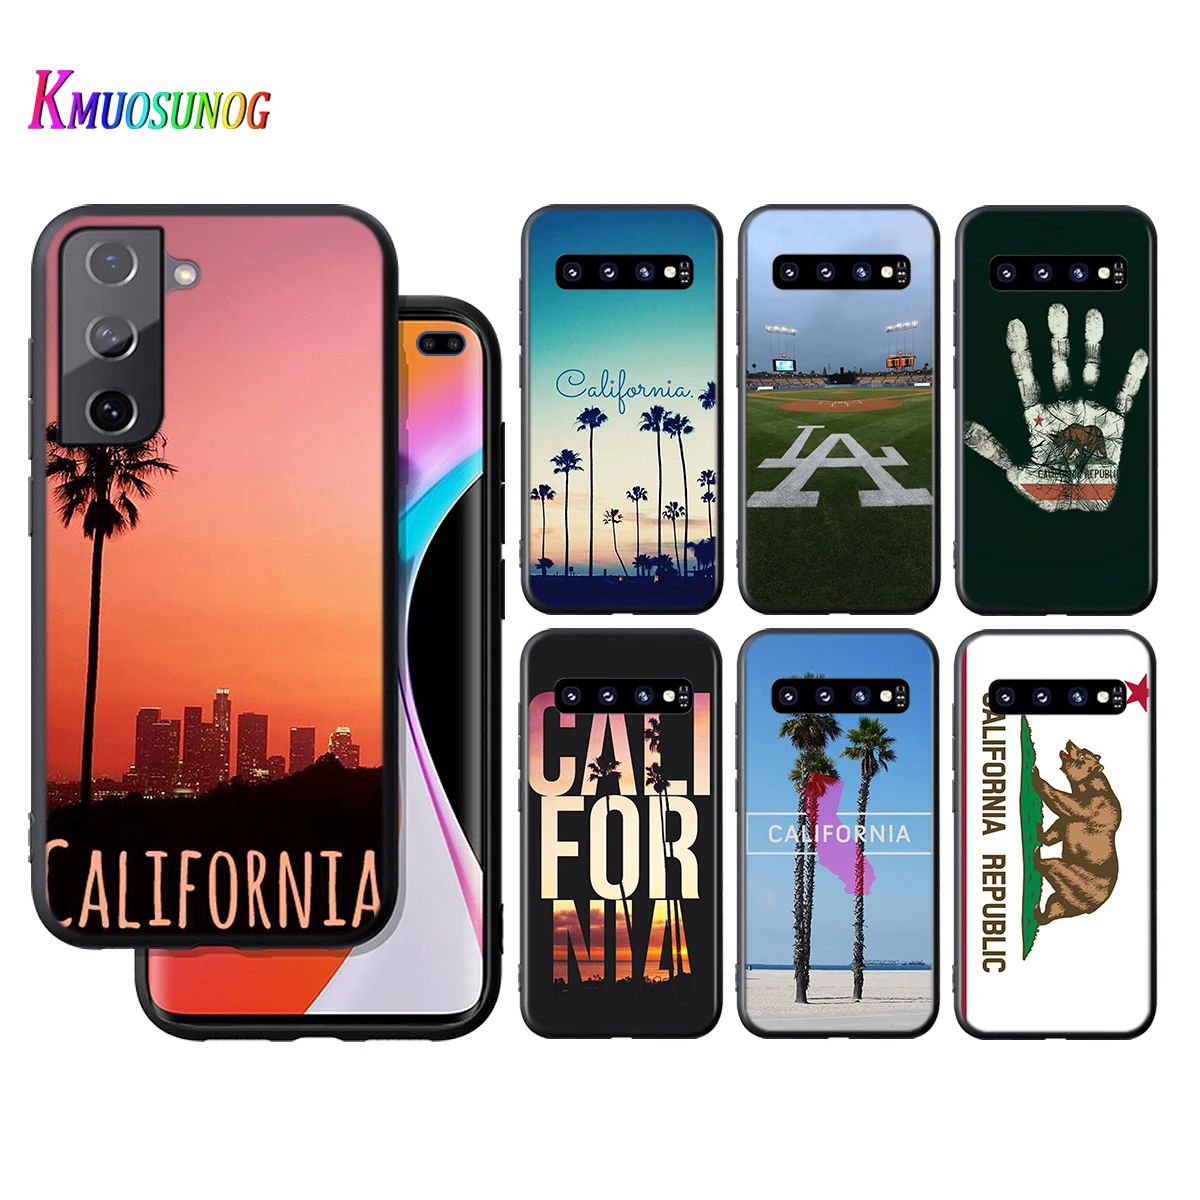 Silicone Cover Travel Los Angeles California For Samsung Galaxy S20 FE Ultra S10 S10e Lite S9 S8 S7 Edge Plus Phone Case|Phone Case & Covers| - AliExpress